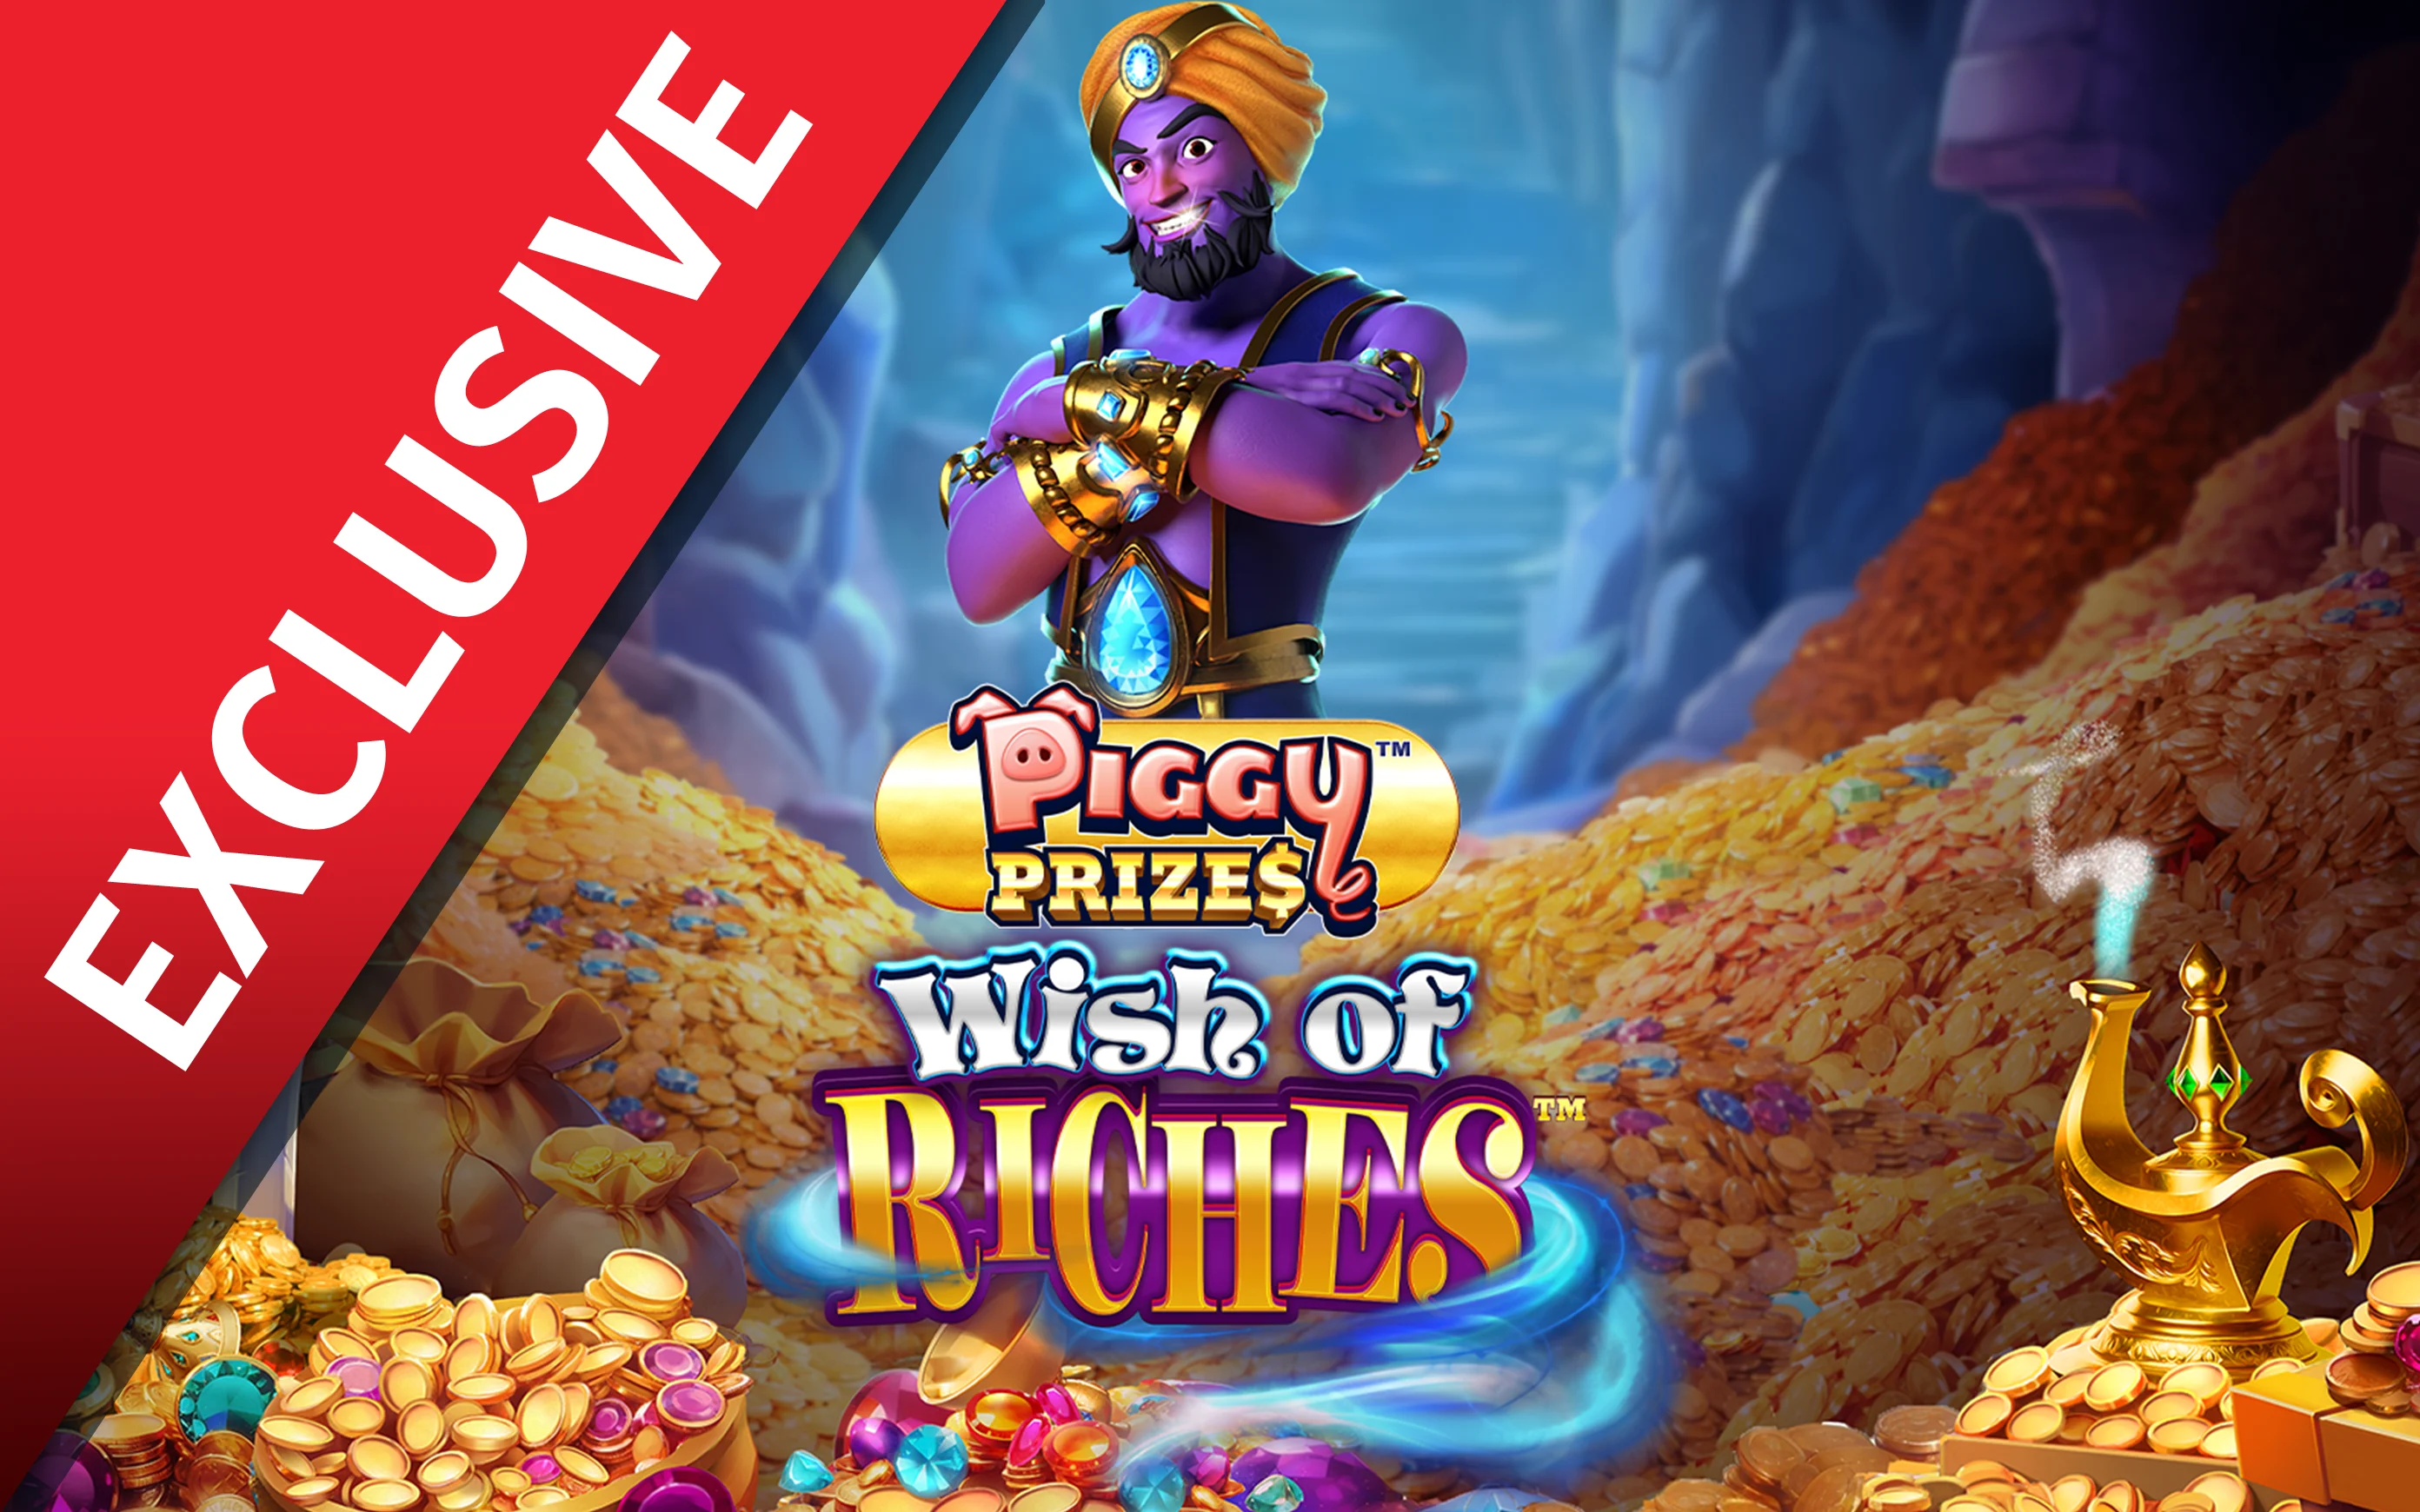 Play Piggy Prizes™ Wish of Riches™ on Starcasino.be online casino